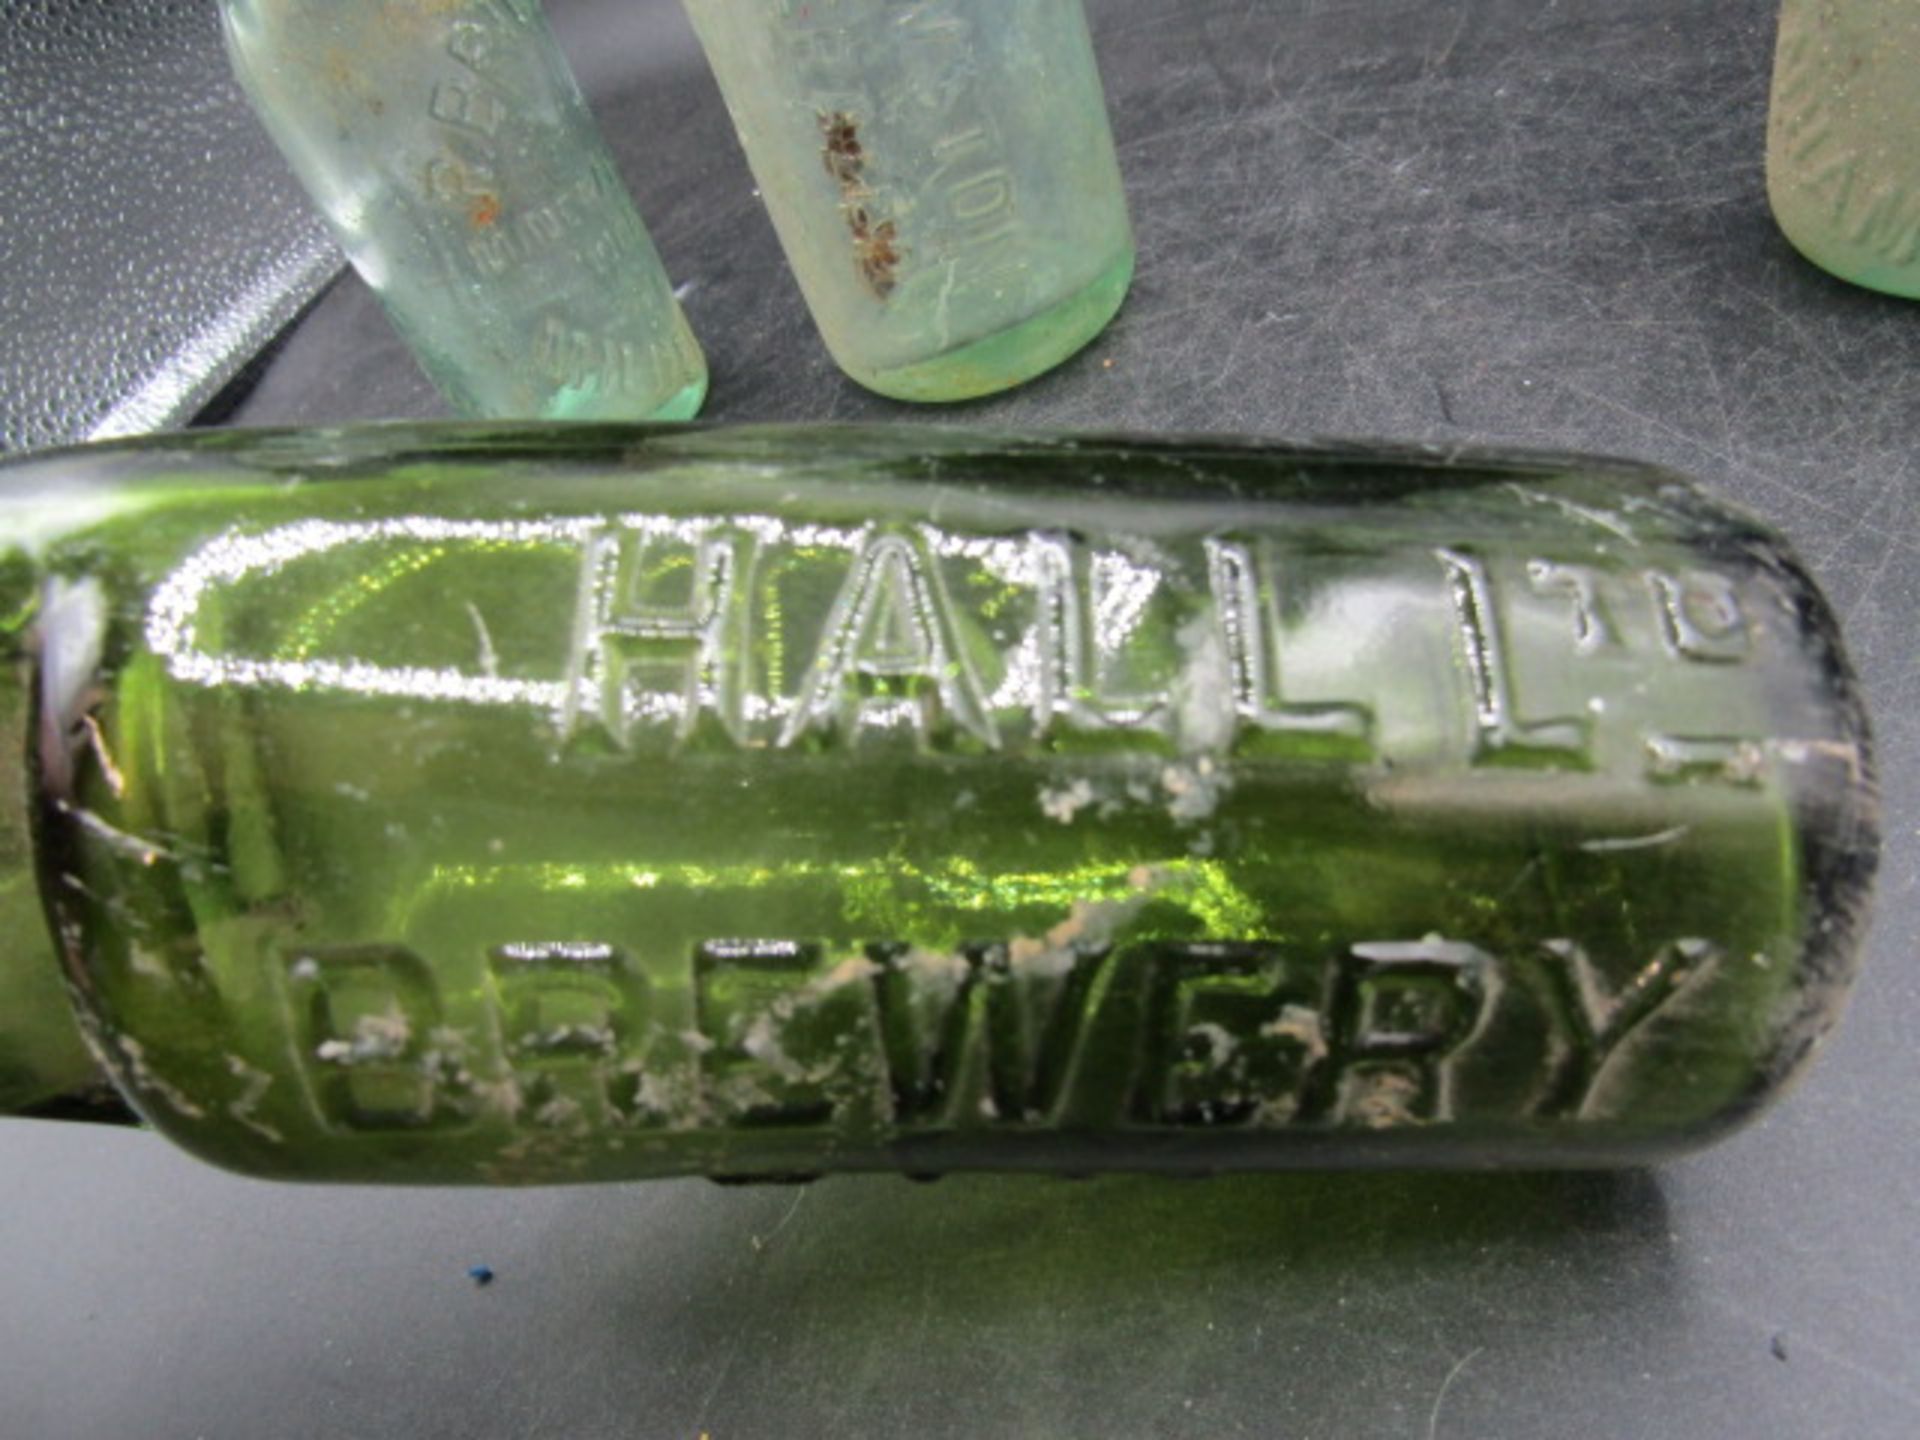 4 codd bottles inc green Ely brewery green codd bottle is in good condition- no chips or cracks etc - Image 2 of 6